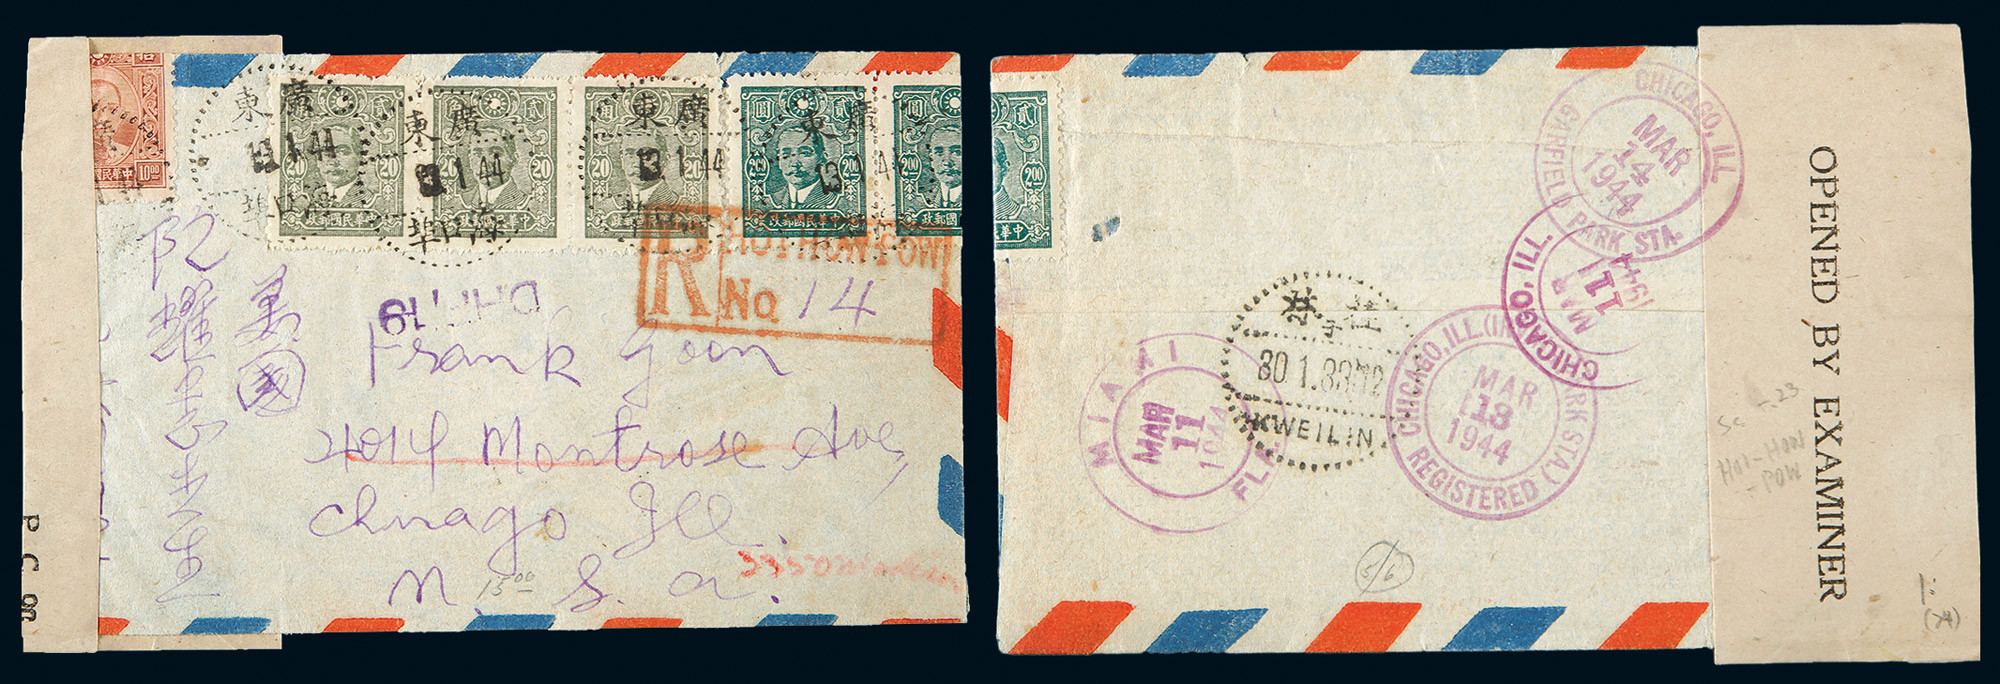 1944 censorship airmail cover sent from Hankoubu to USA，Nice condition